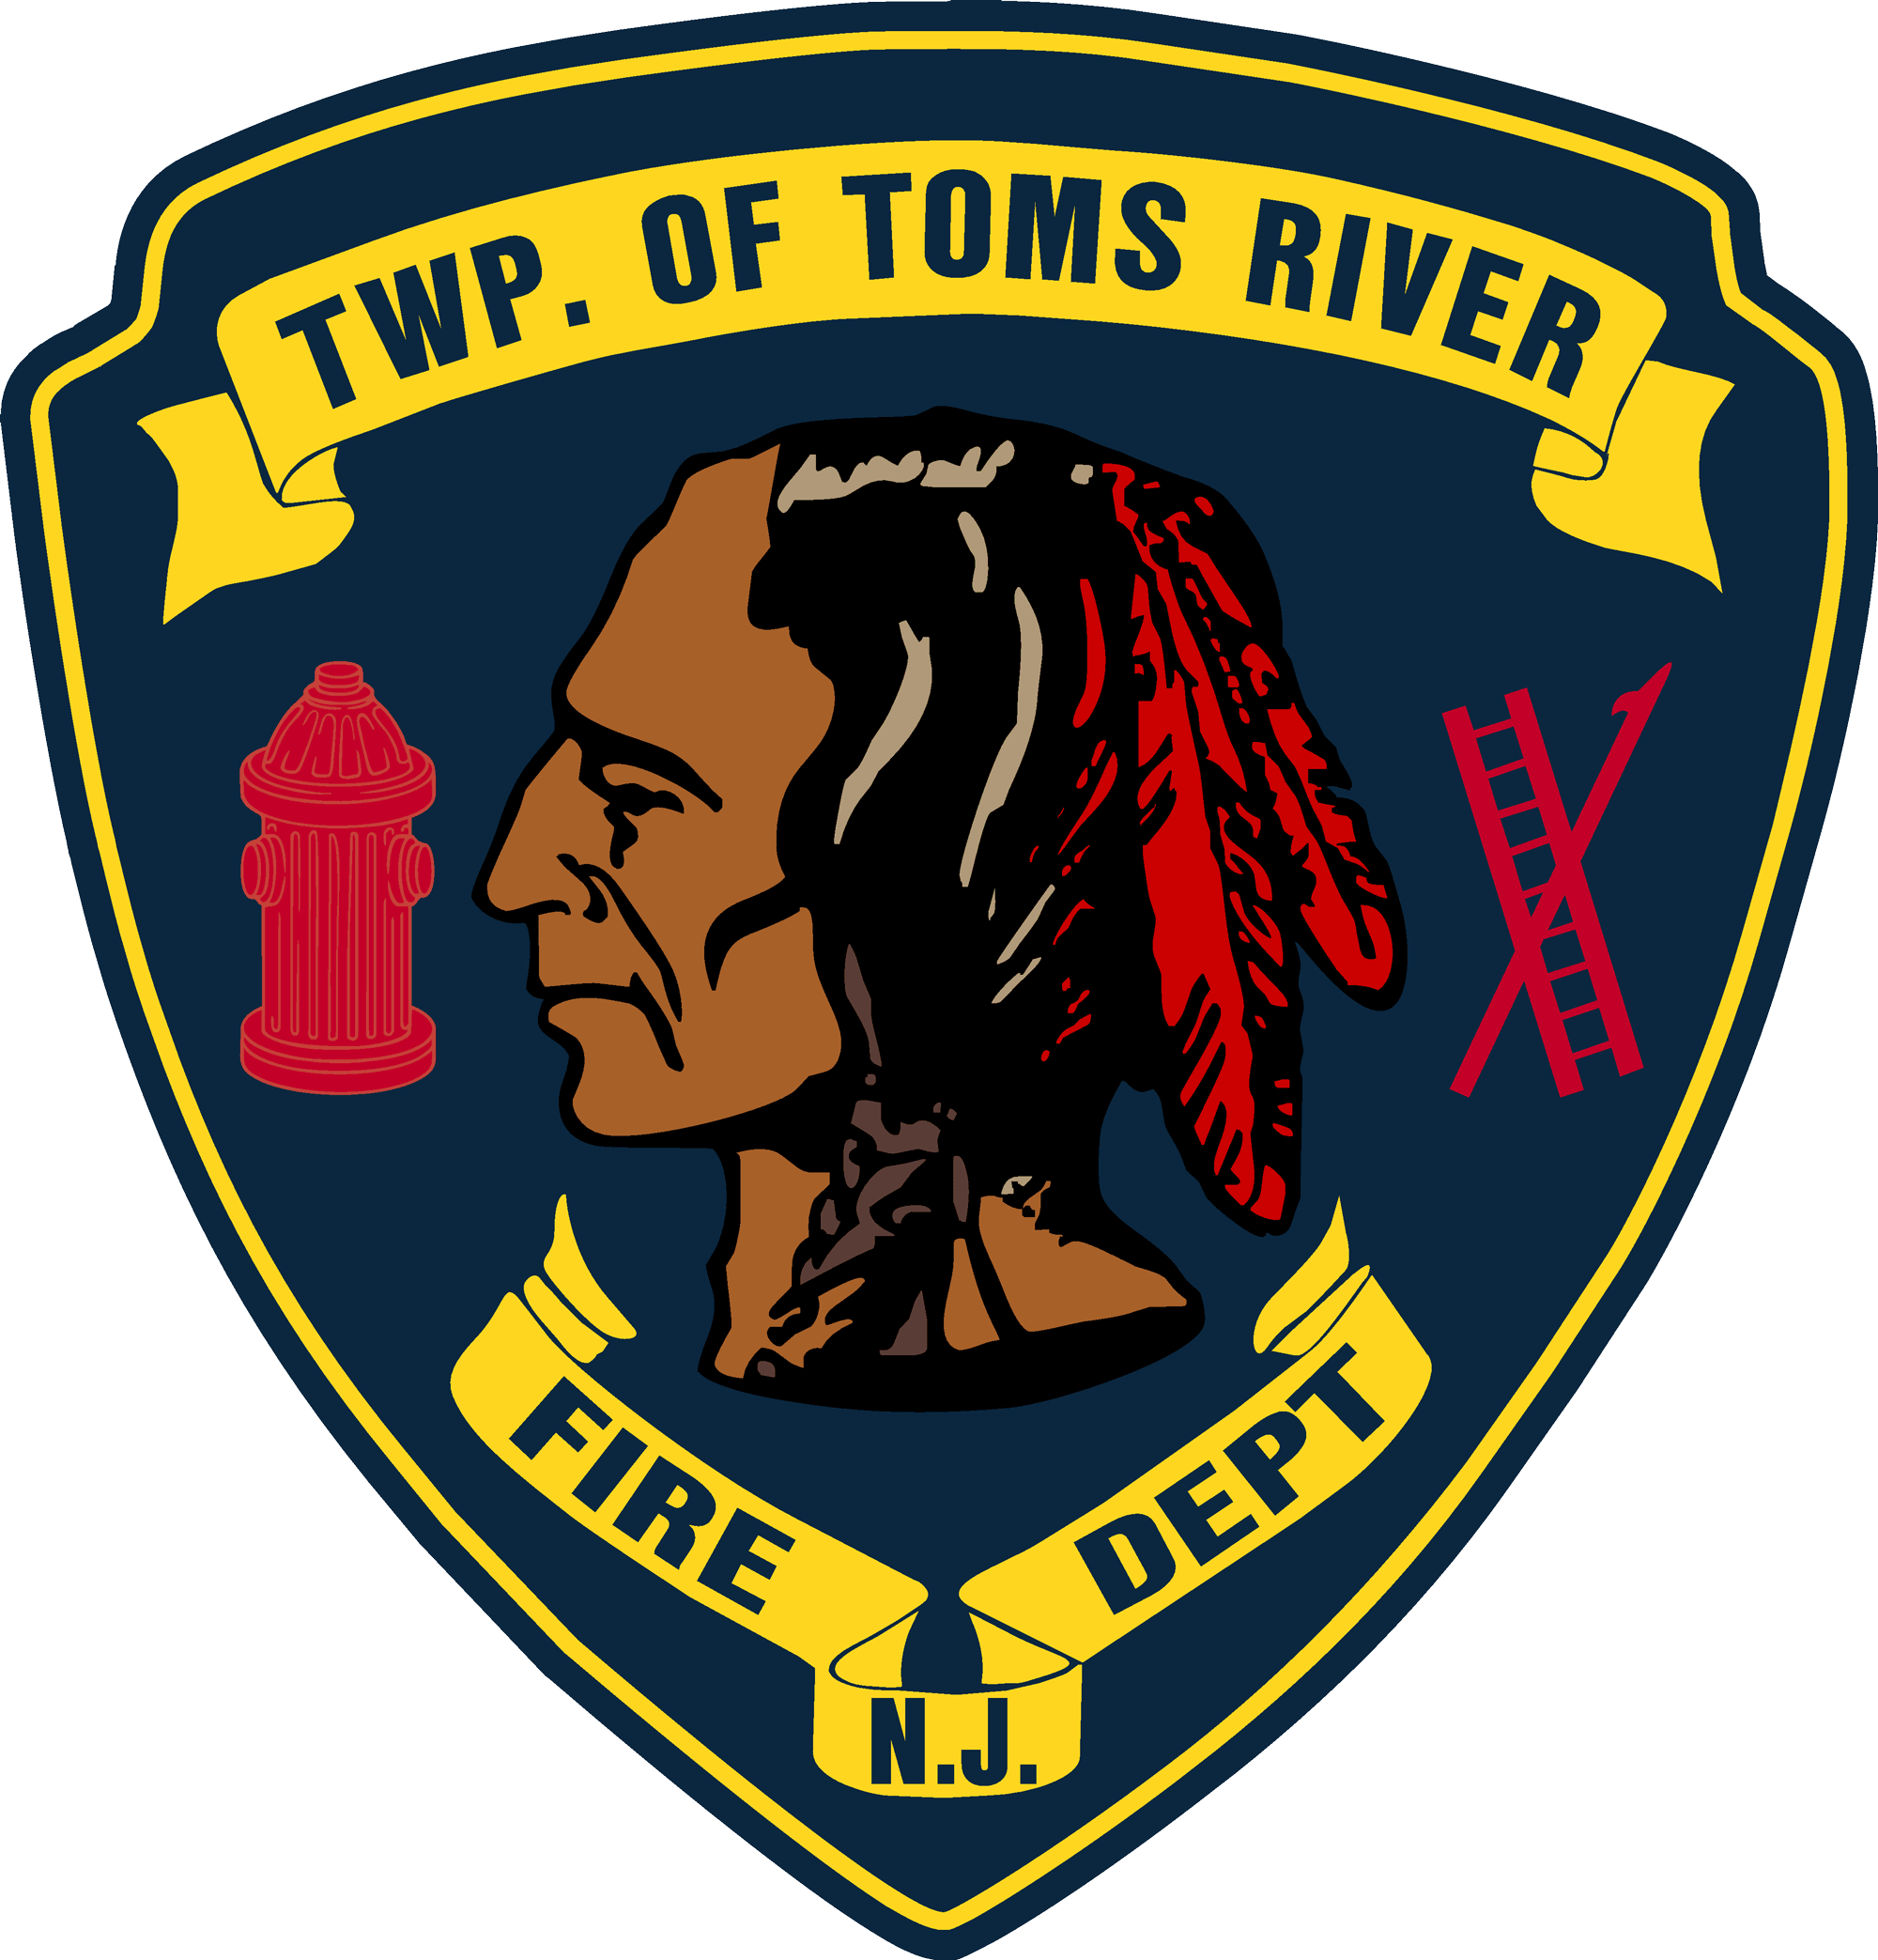 Toms River Board of Fire Commissioners District 1